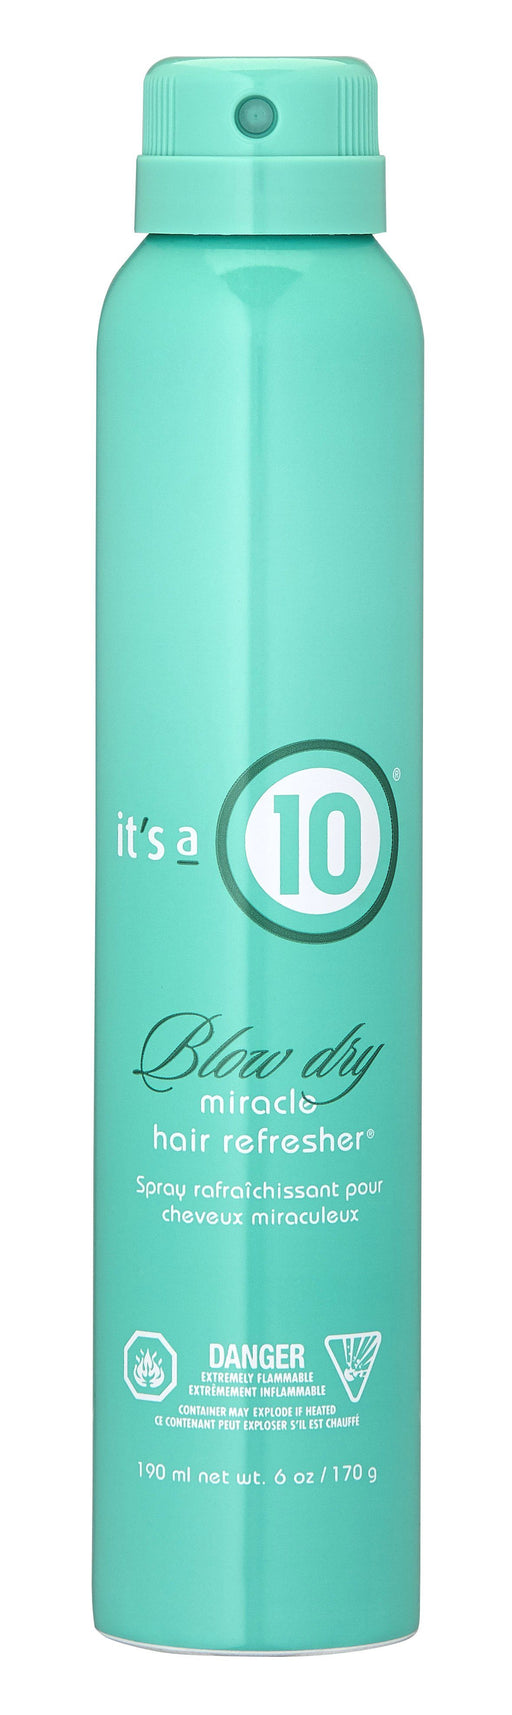 It's A 10 Miracle Blow Dry Hair Refresher 6oz.